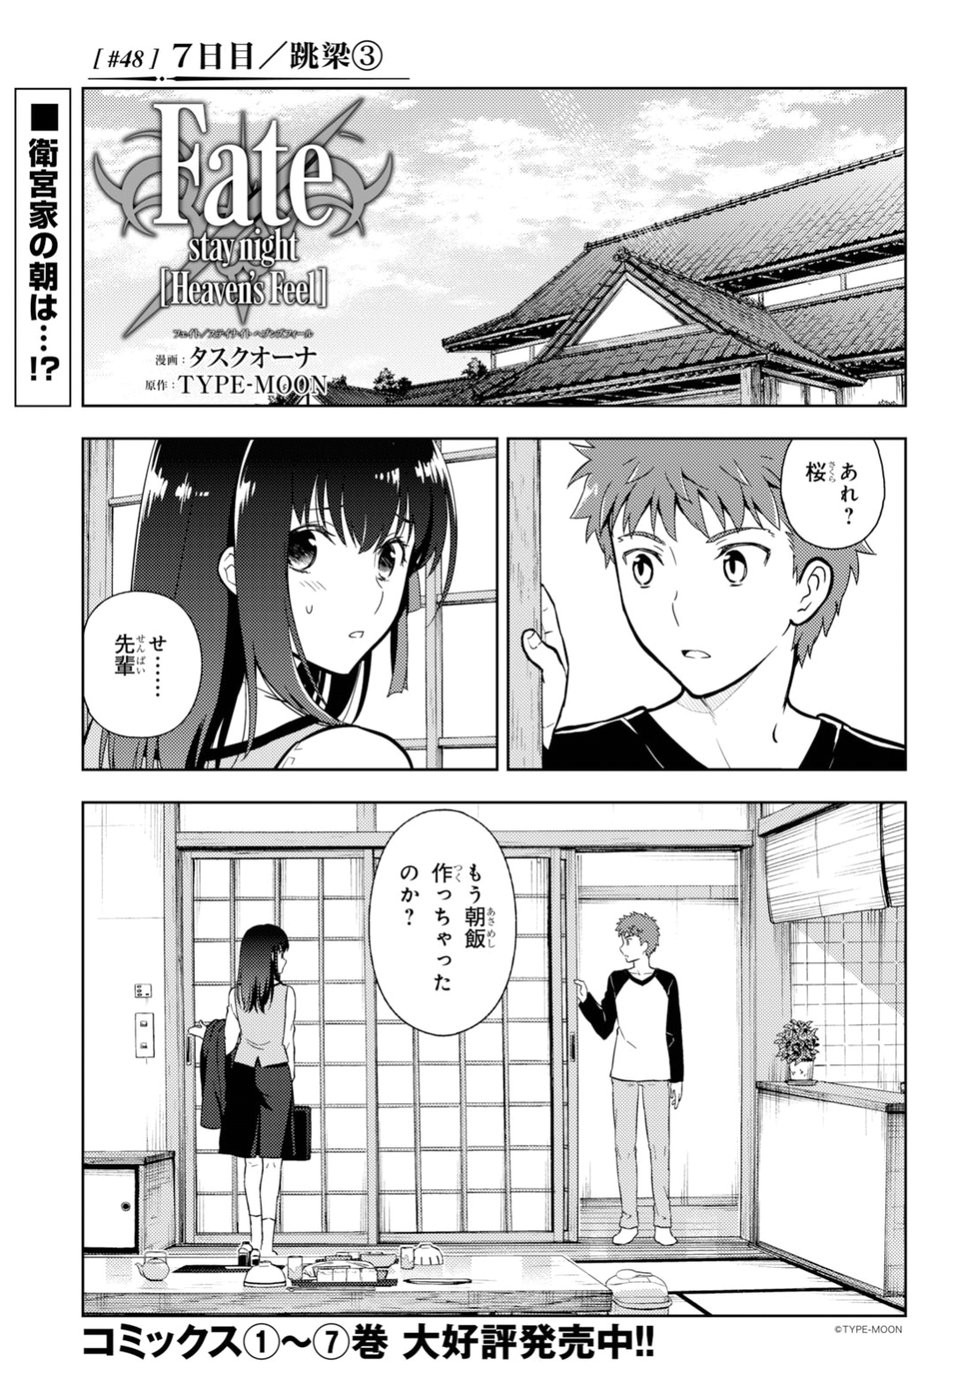 Fate/Stay night Heaven's Feel - Chapter 48 - Page 1